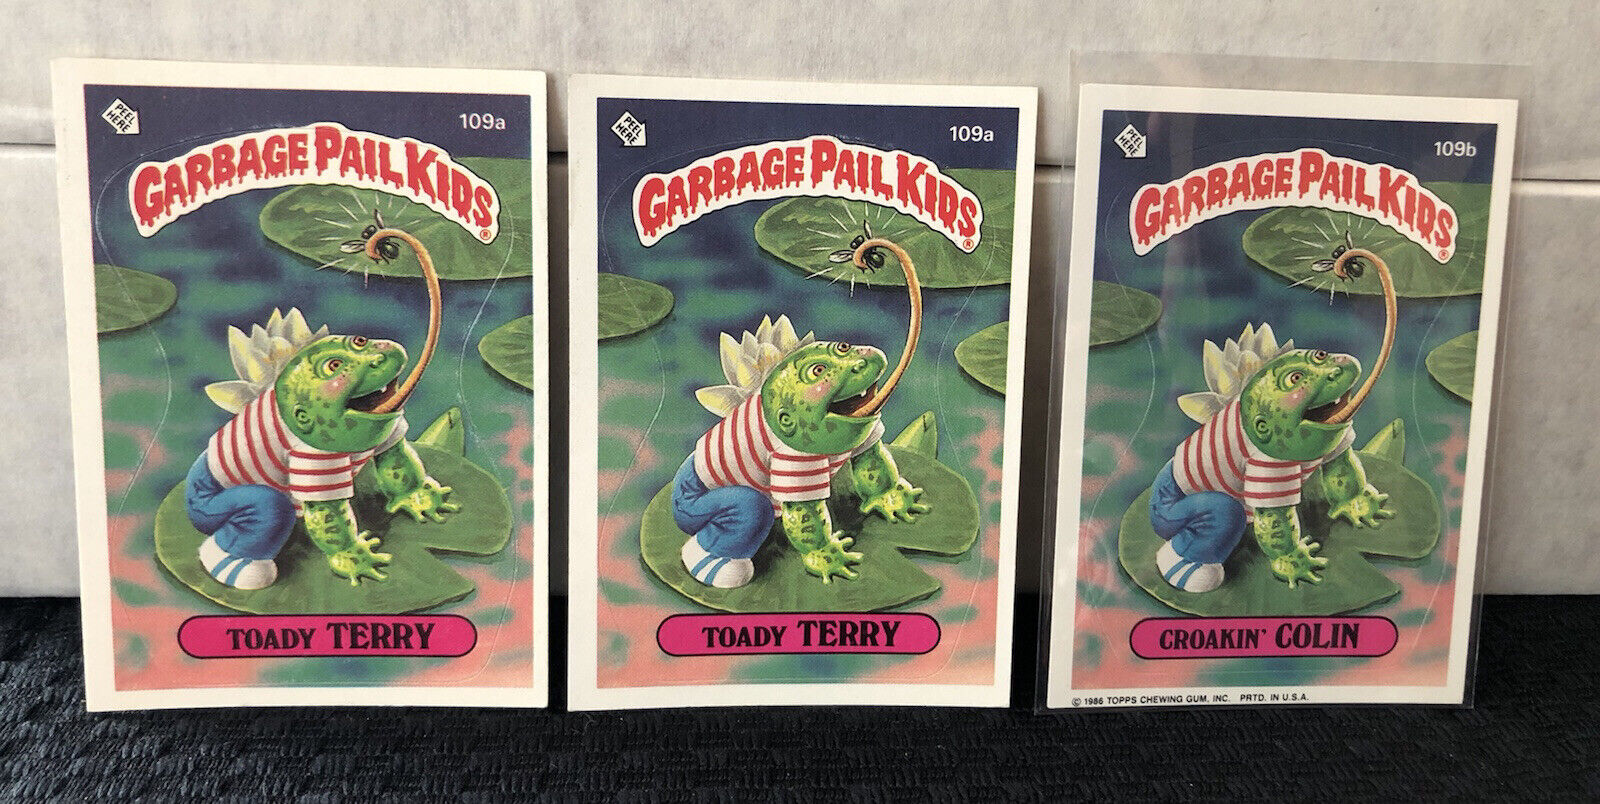 1986 Topps Garbage Pail Kids Series 3 #109a/109b  Toast Terry / Croakin’ Colin